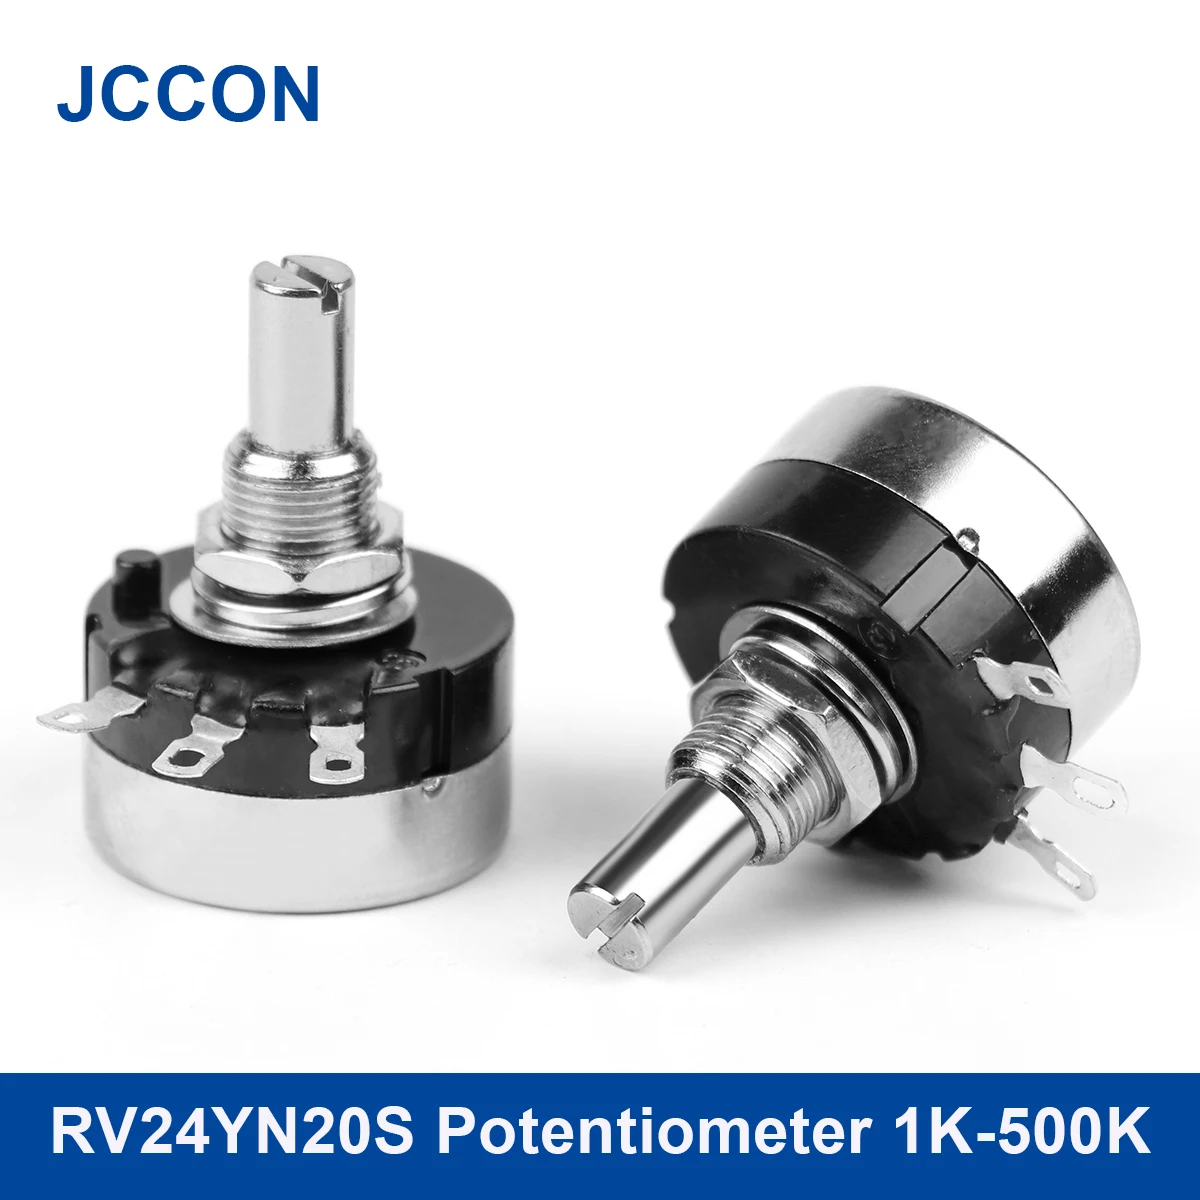 1Pcs RV24YN20S Potentiometer 1K 2K 20K 50K 100K 200K 500K Single-turn Carbon Film Potentiometer Vertical Rotary Switches rv24yn20s 101 102 b103 104 105 201 202 203 204 254 302 303 501 502 503 504 5k 10k 100k 500k 200k 100 ohm potentiometer rv24yn